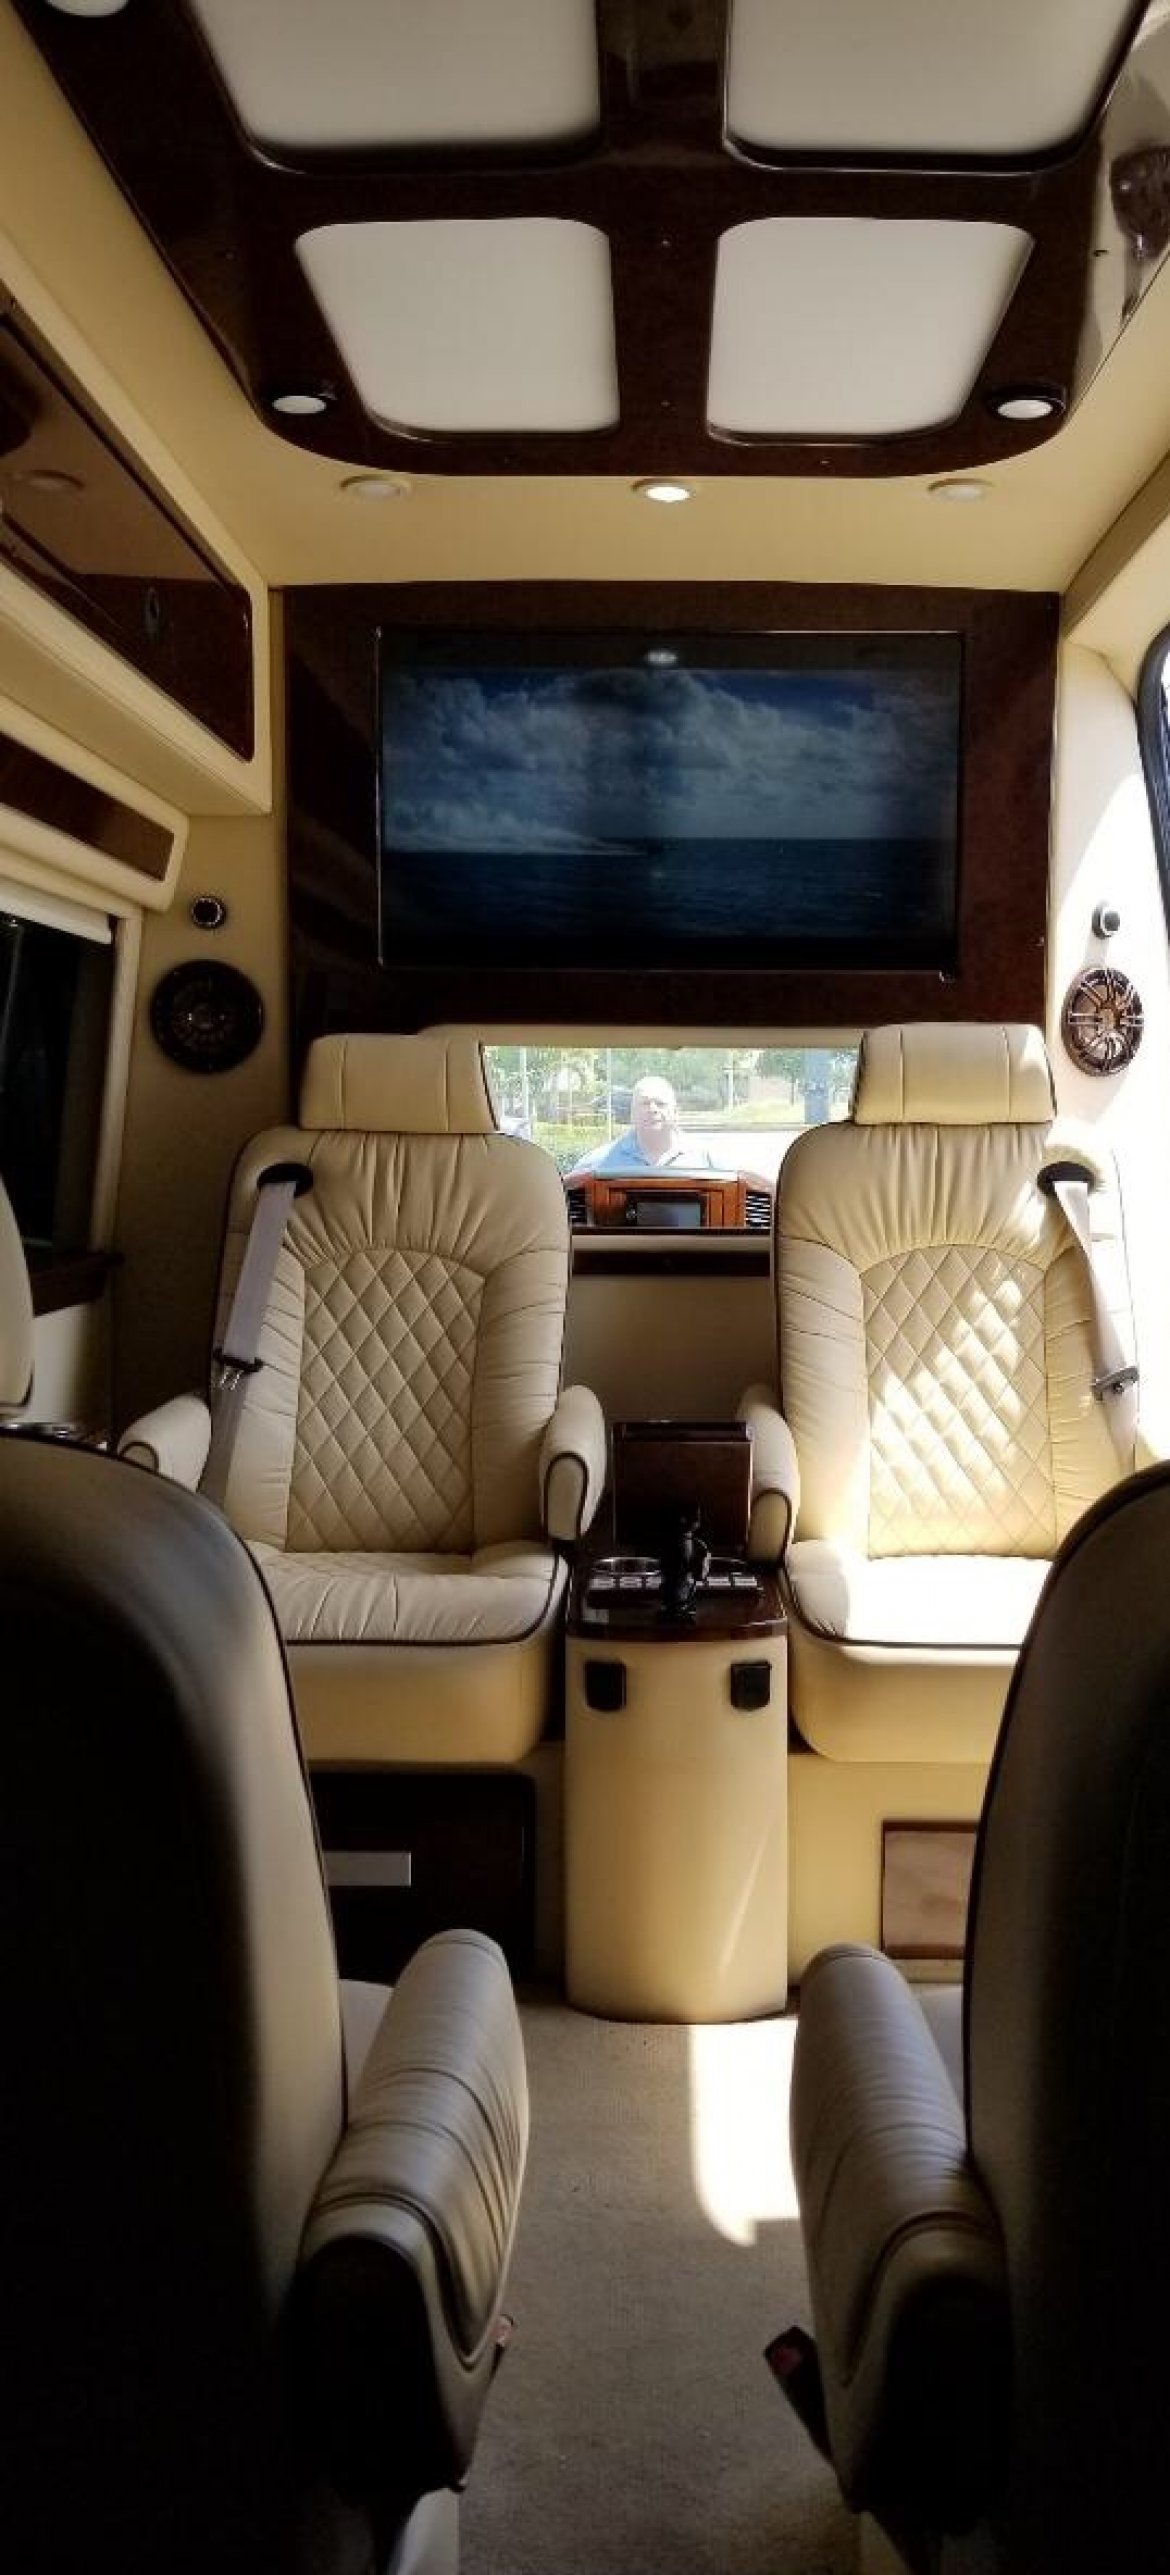 Sprinter for sale: 2015 Mercedes-Benz Sprinter model 3500 wheel base 170 170&quot; by Midwest models 3500  Wheel base 170 Business  CEO